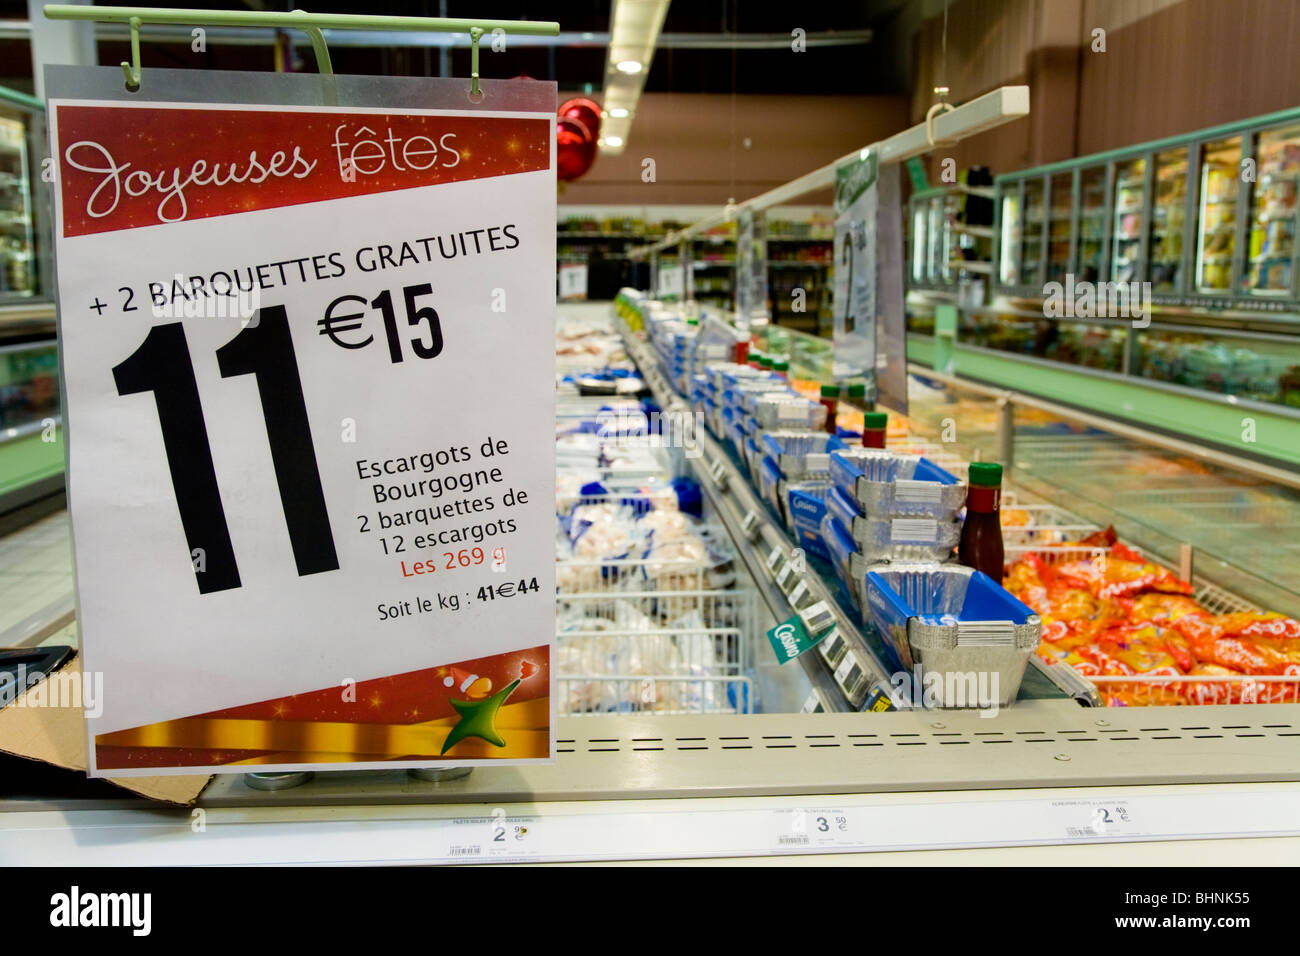 Price / prices point of sale sign, at Christmas, on a row of chest freezers in a French supermarket. France. Stock Photo